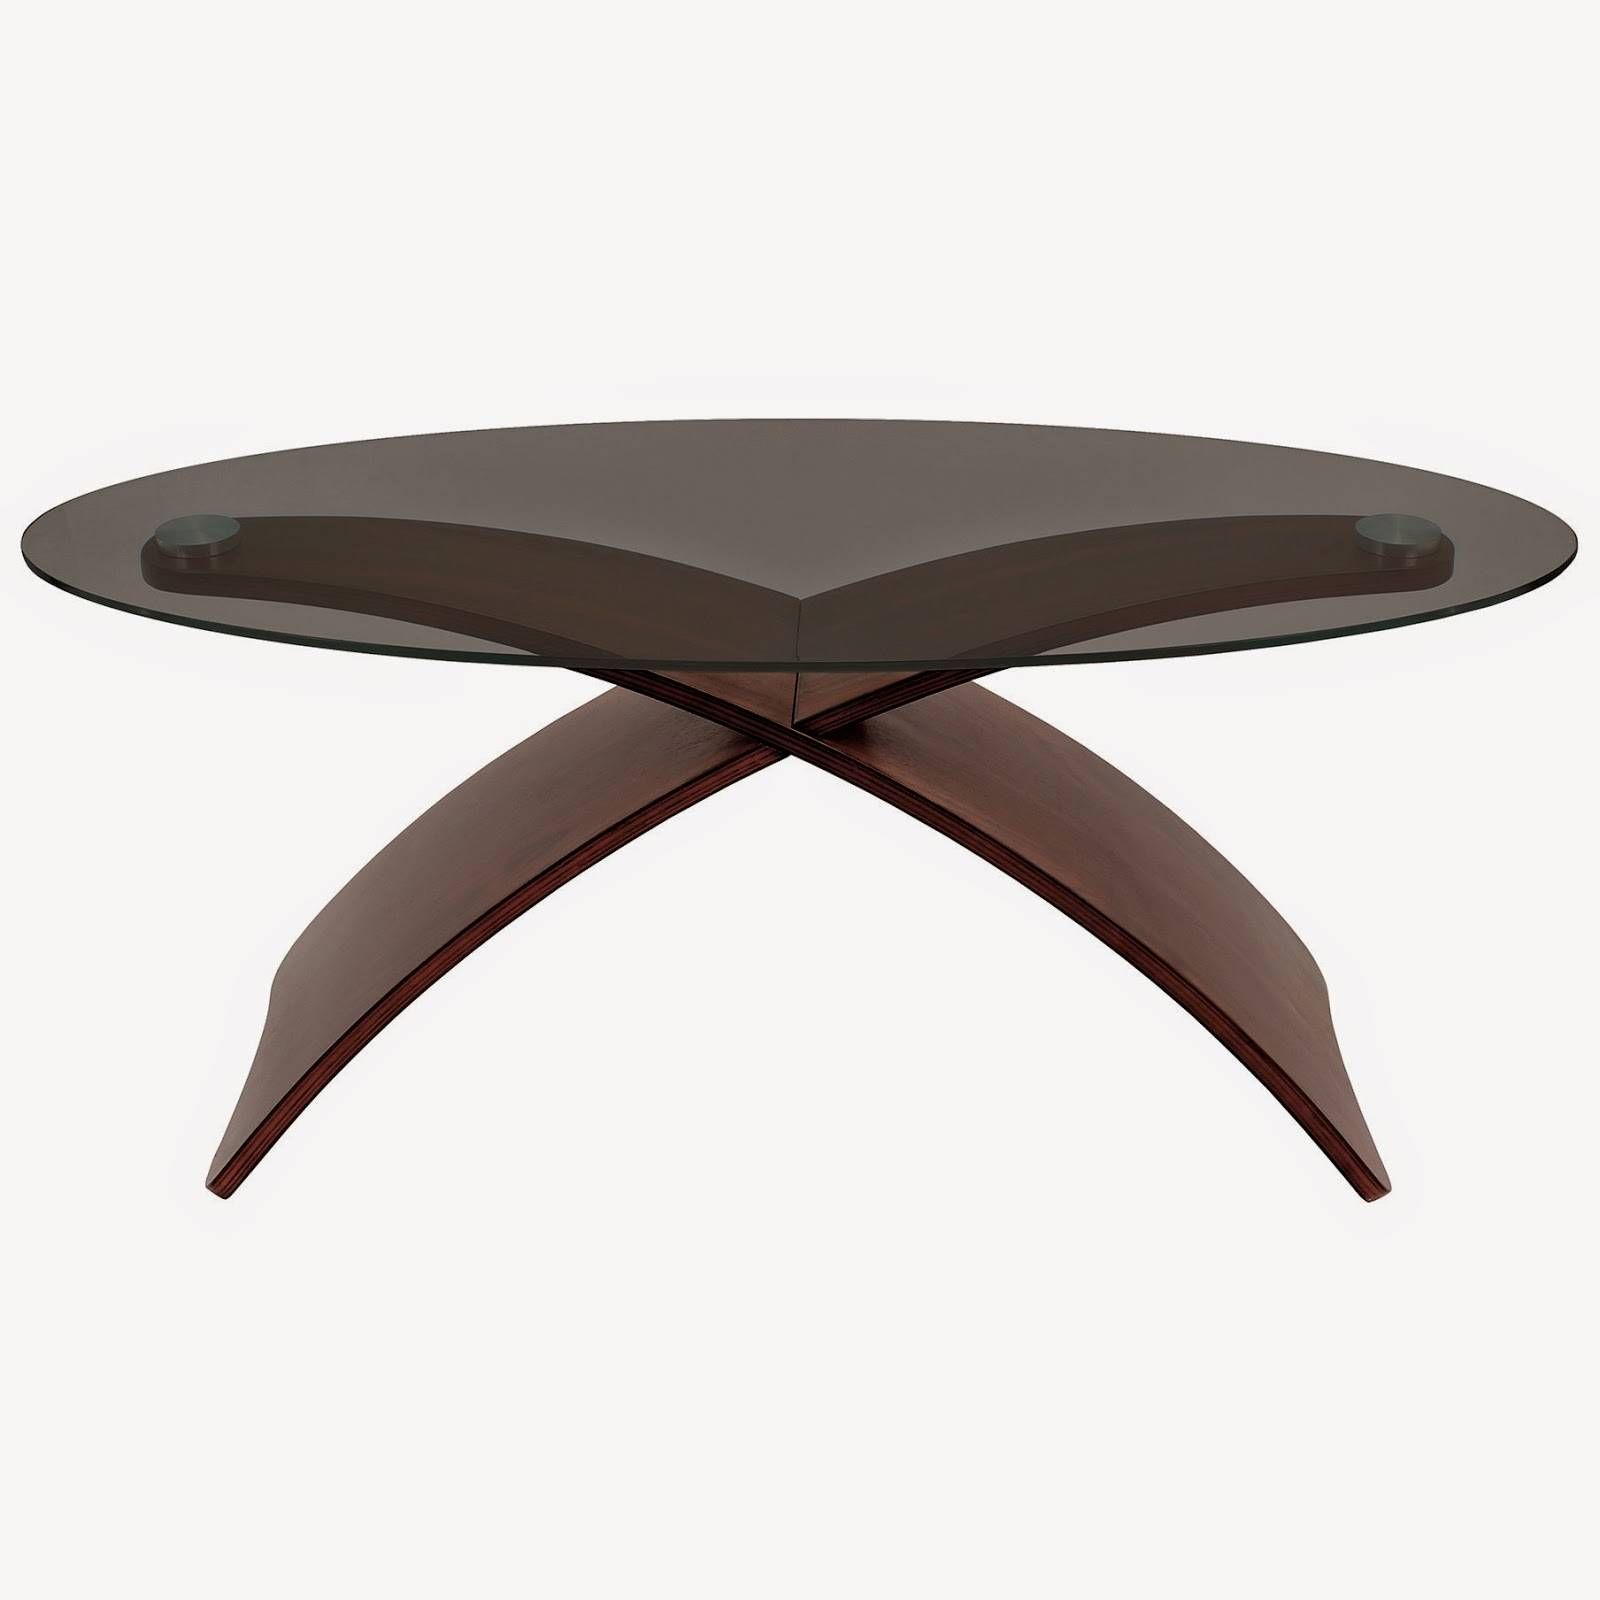 25 Elegant Oval Coffee Table Designs Made Of Glass And Wood Regarding Oval Glass Coffee Tables (Photo 25 of 30)